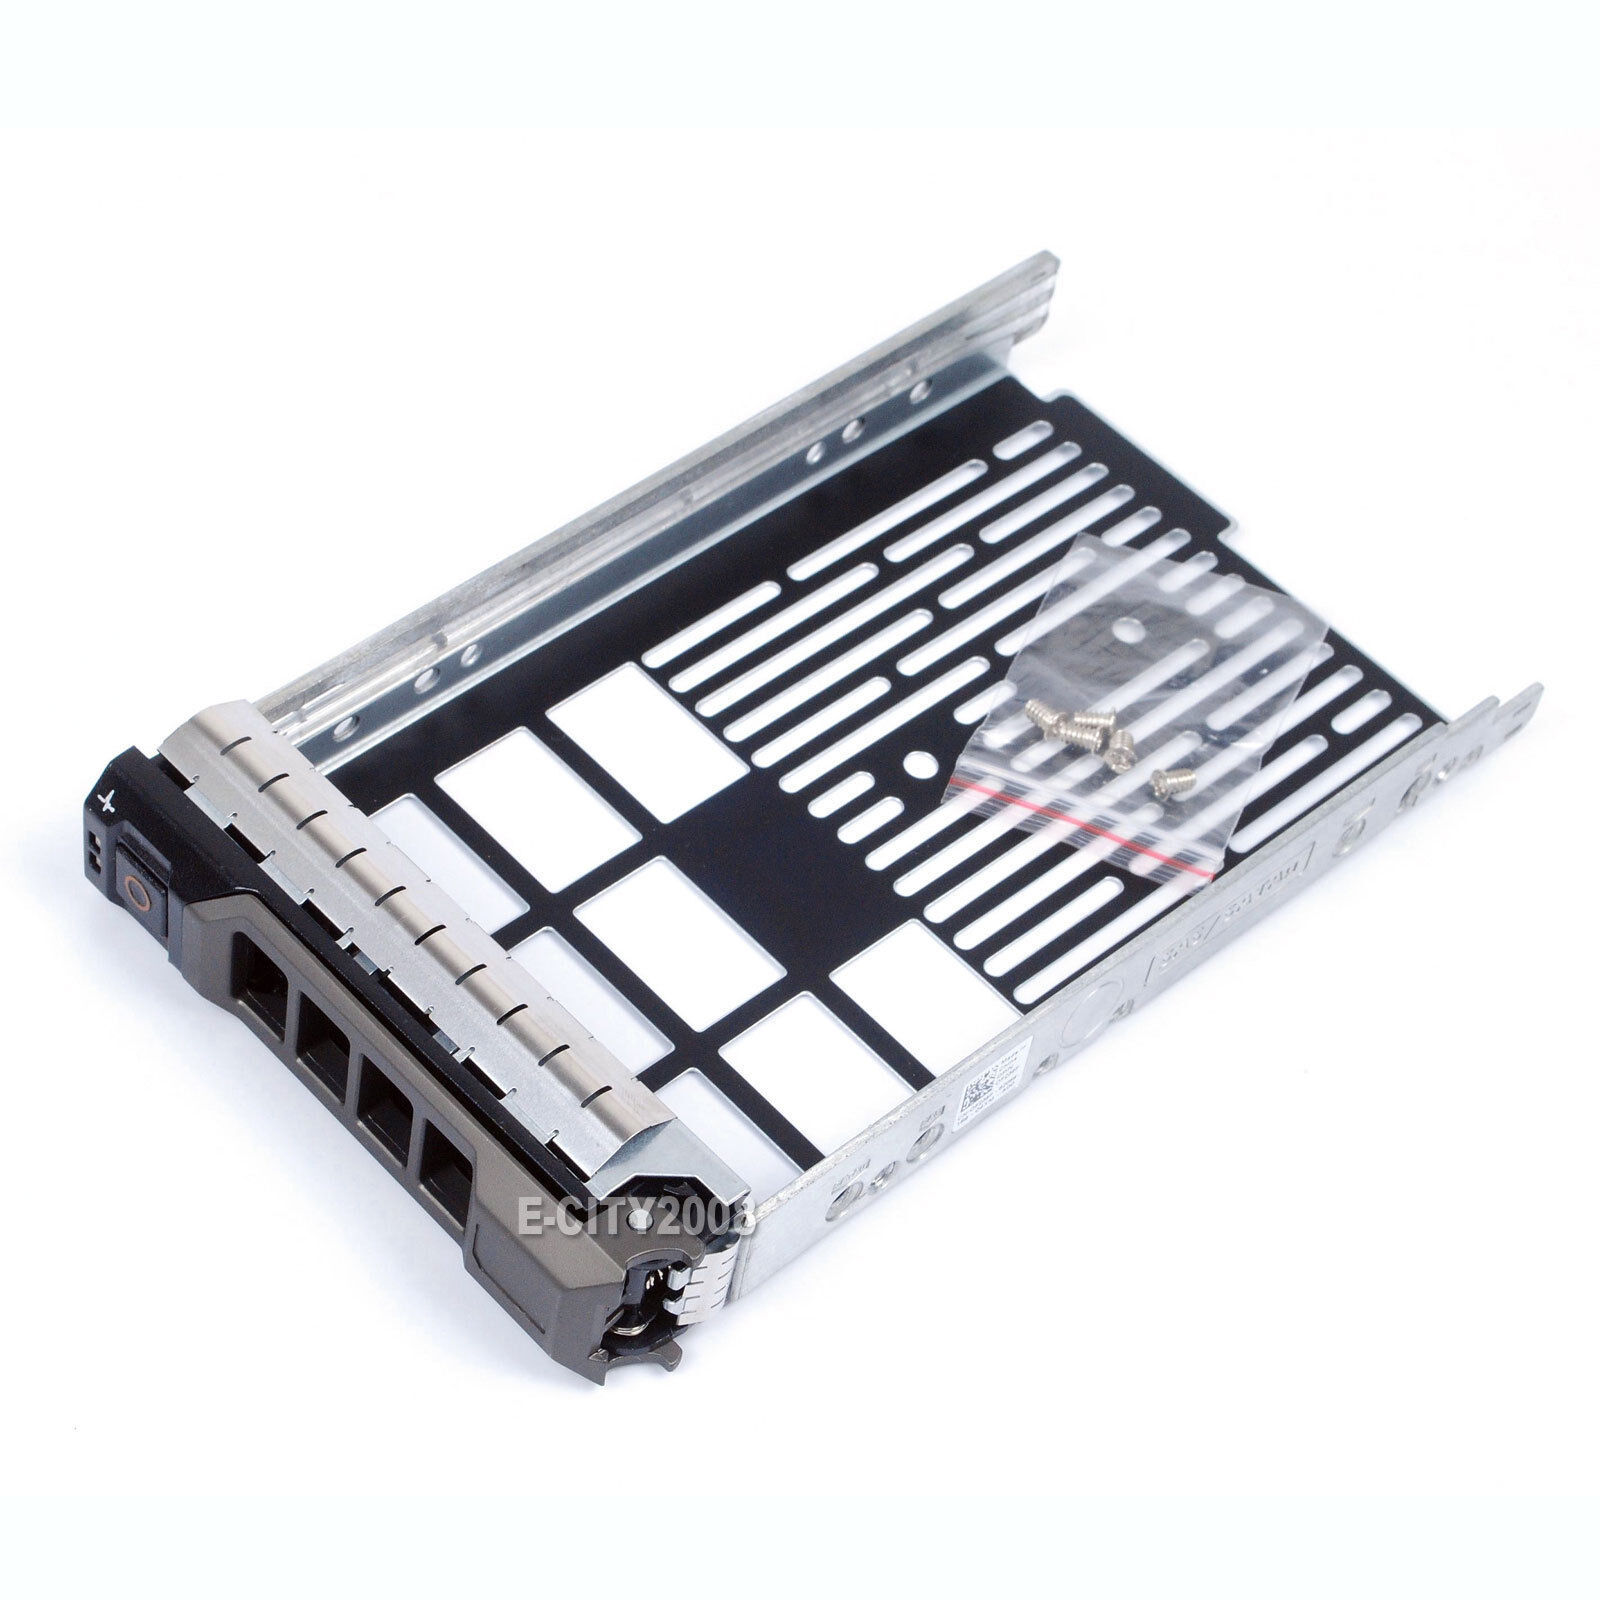 Primary image for 3.5" SATA SAS HDD Hard Drive Tray Caddy For Dell PowerEdge R730XD Ship From USA